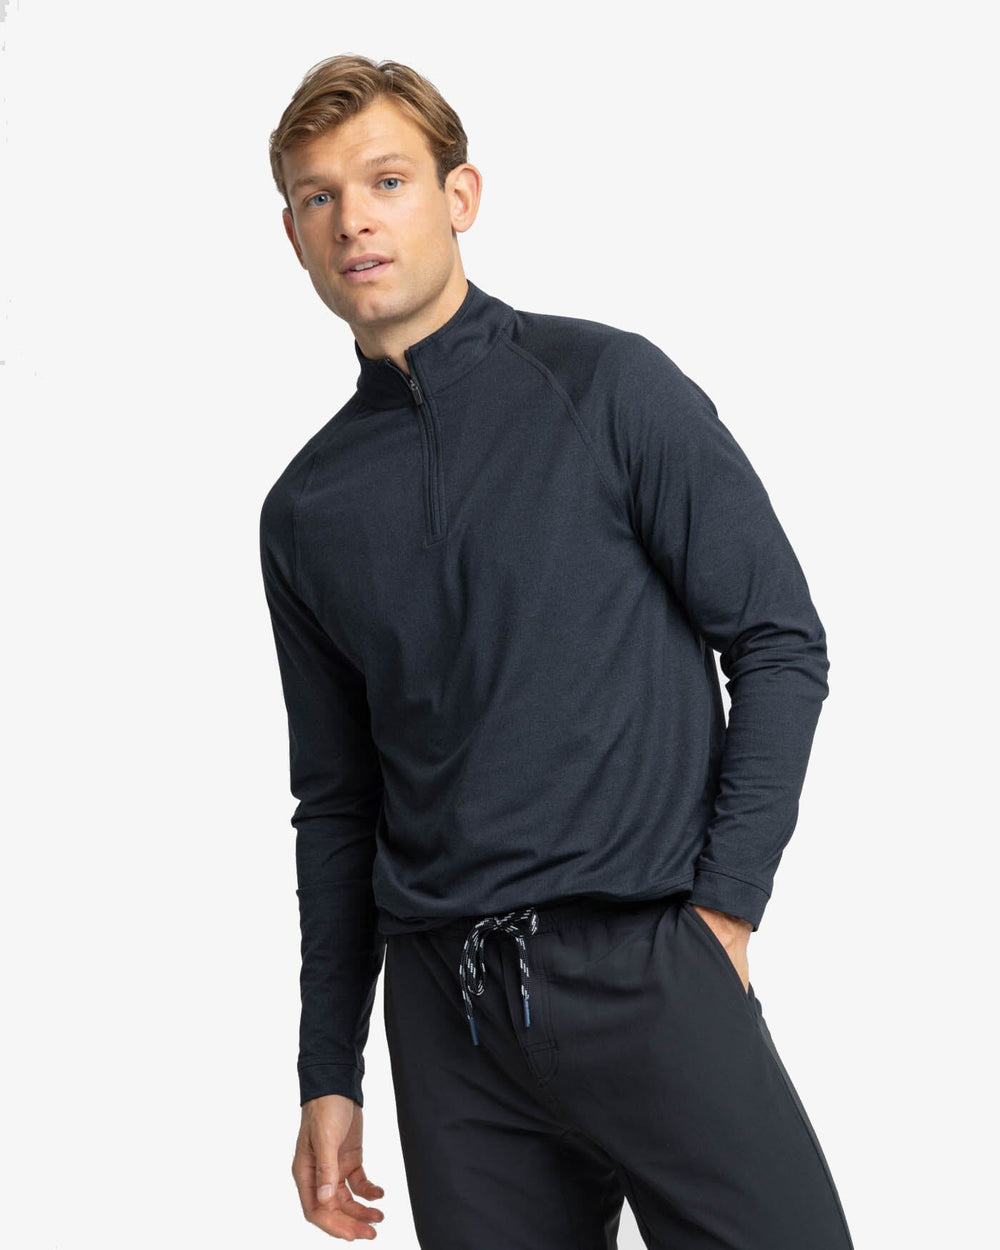 The front view of the Southern Tide Cruiser Heather Quarter Zip Pullover by Southern Tide - Heather Caviar Black